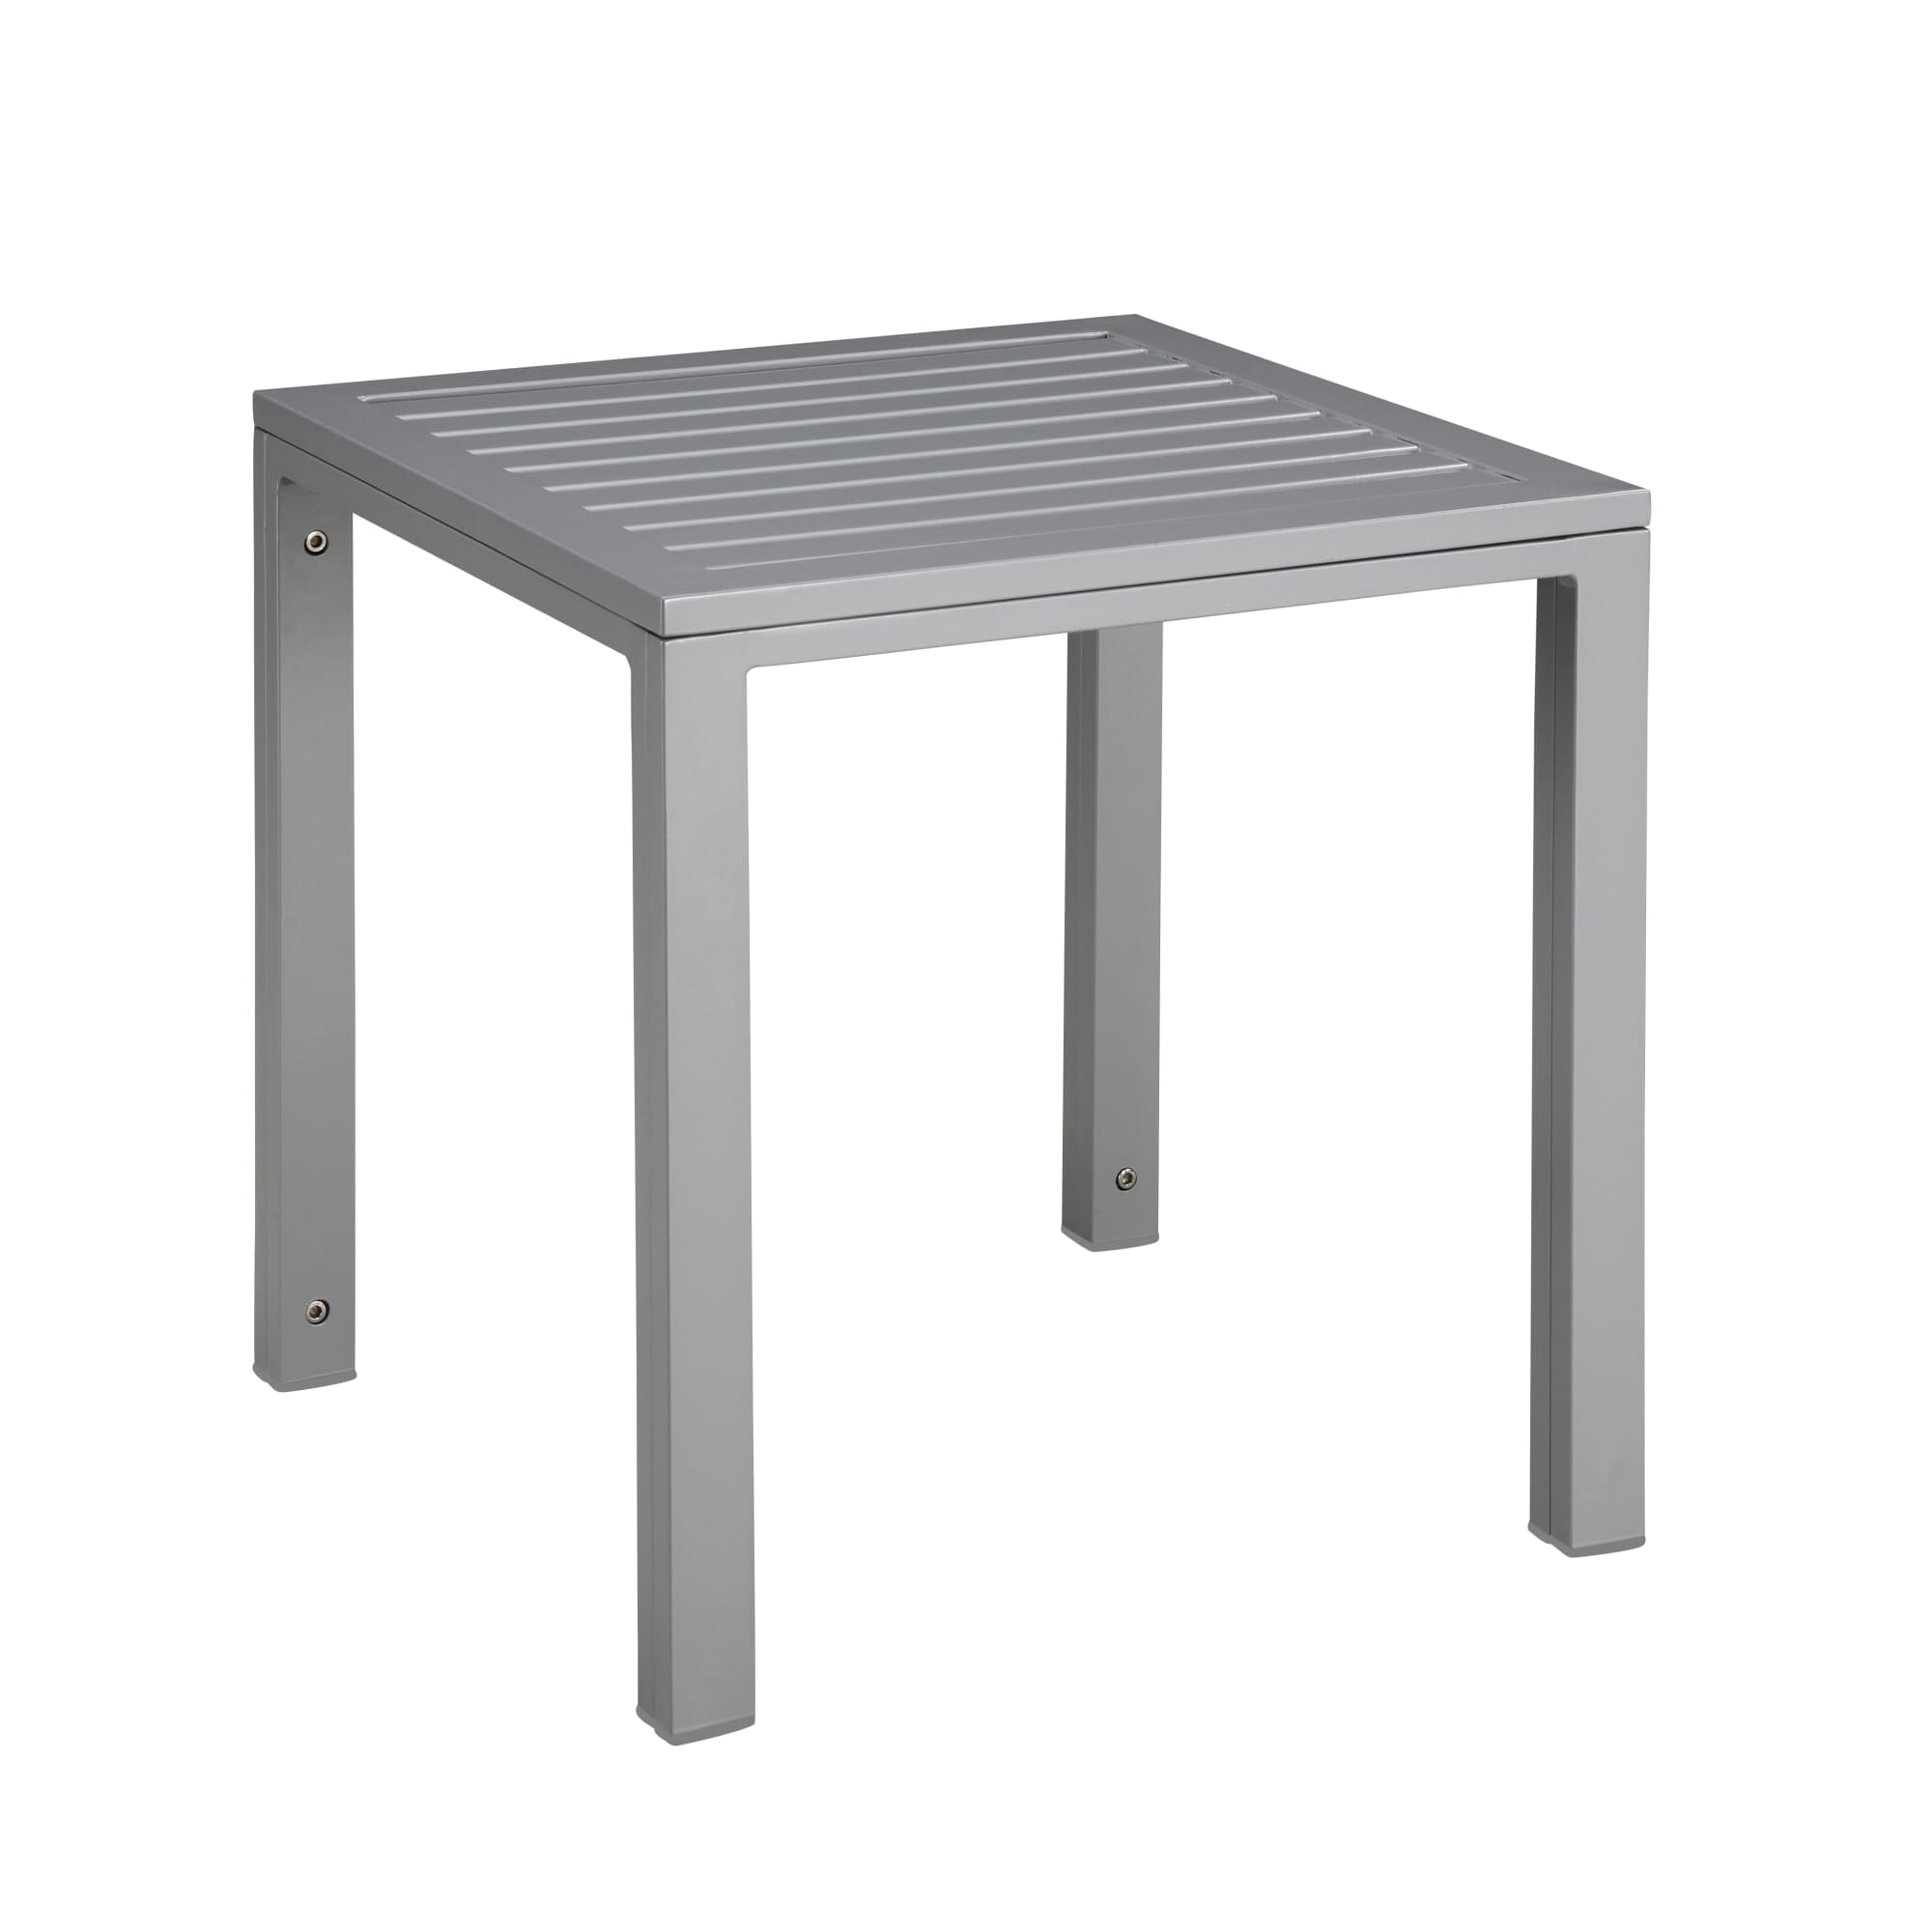 Garbar cubic side table outdoor 50x50 gray